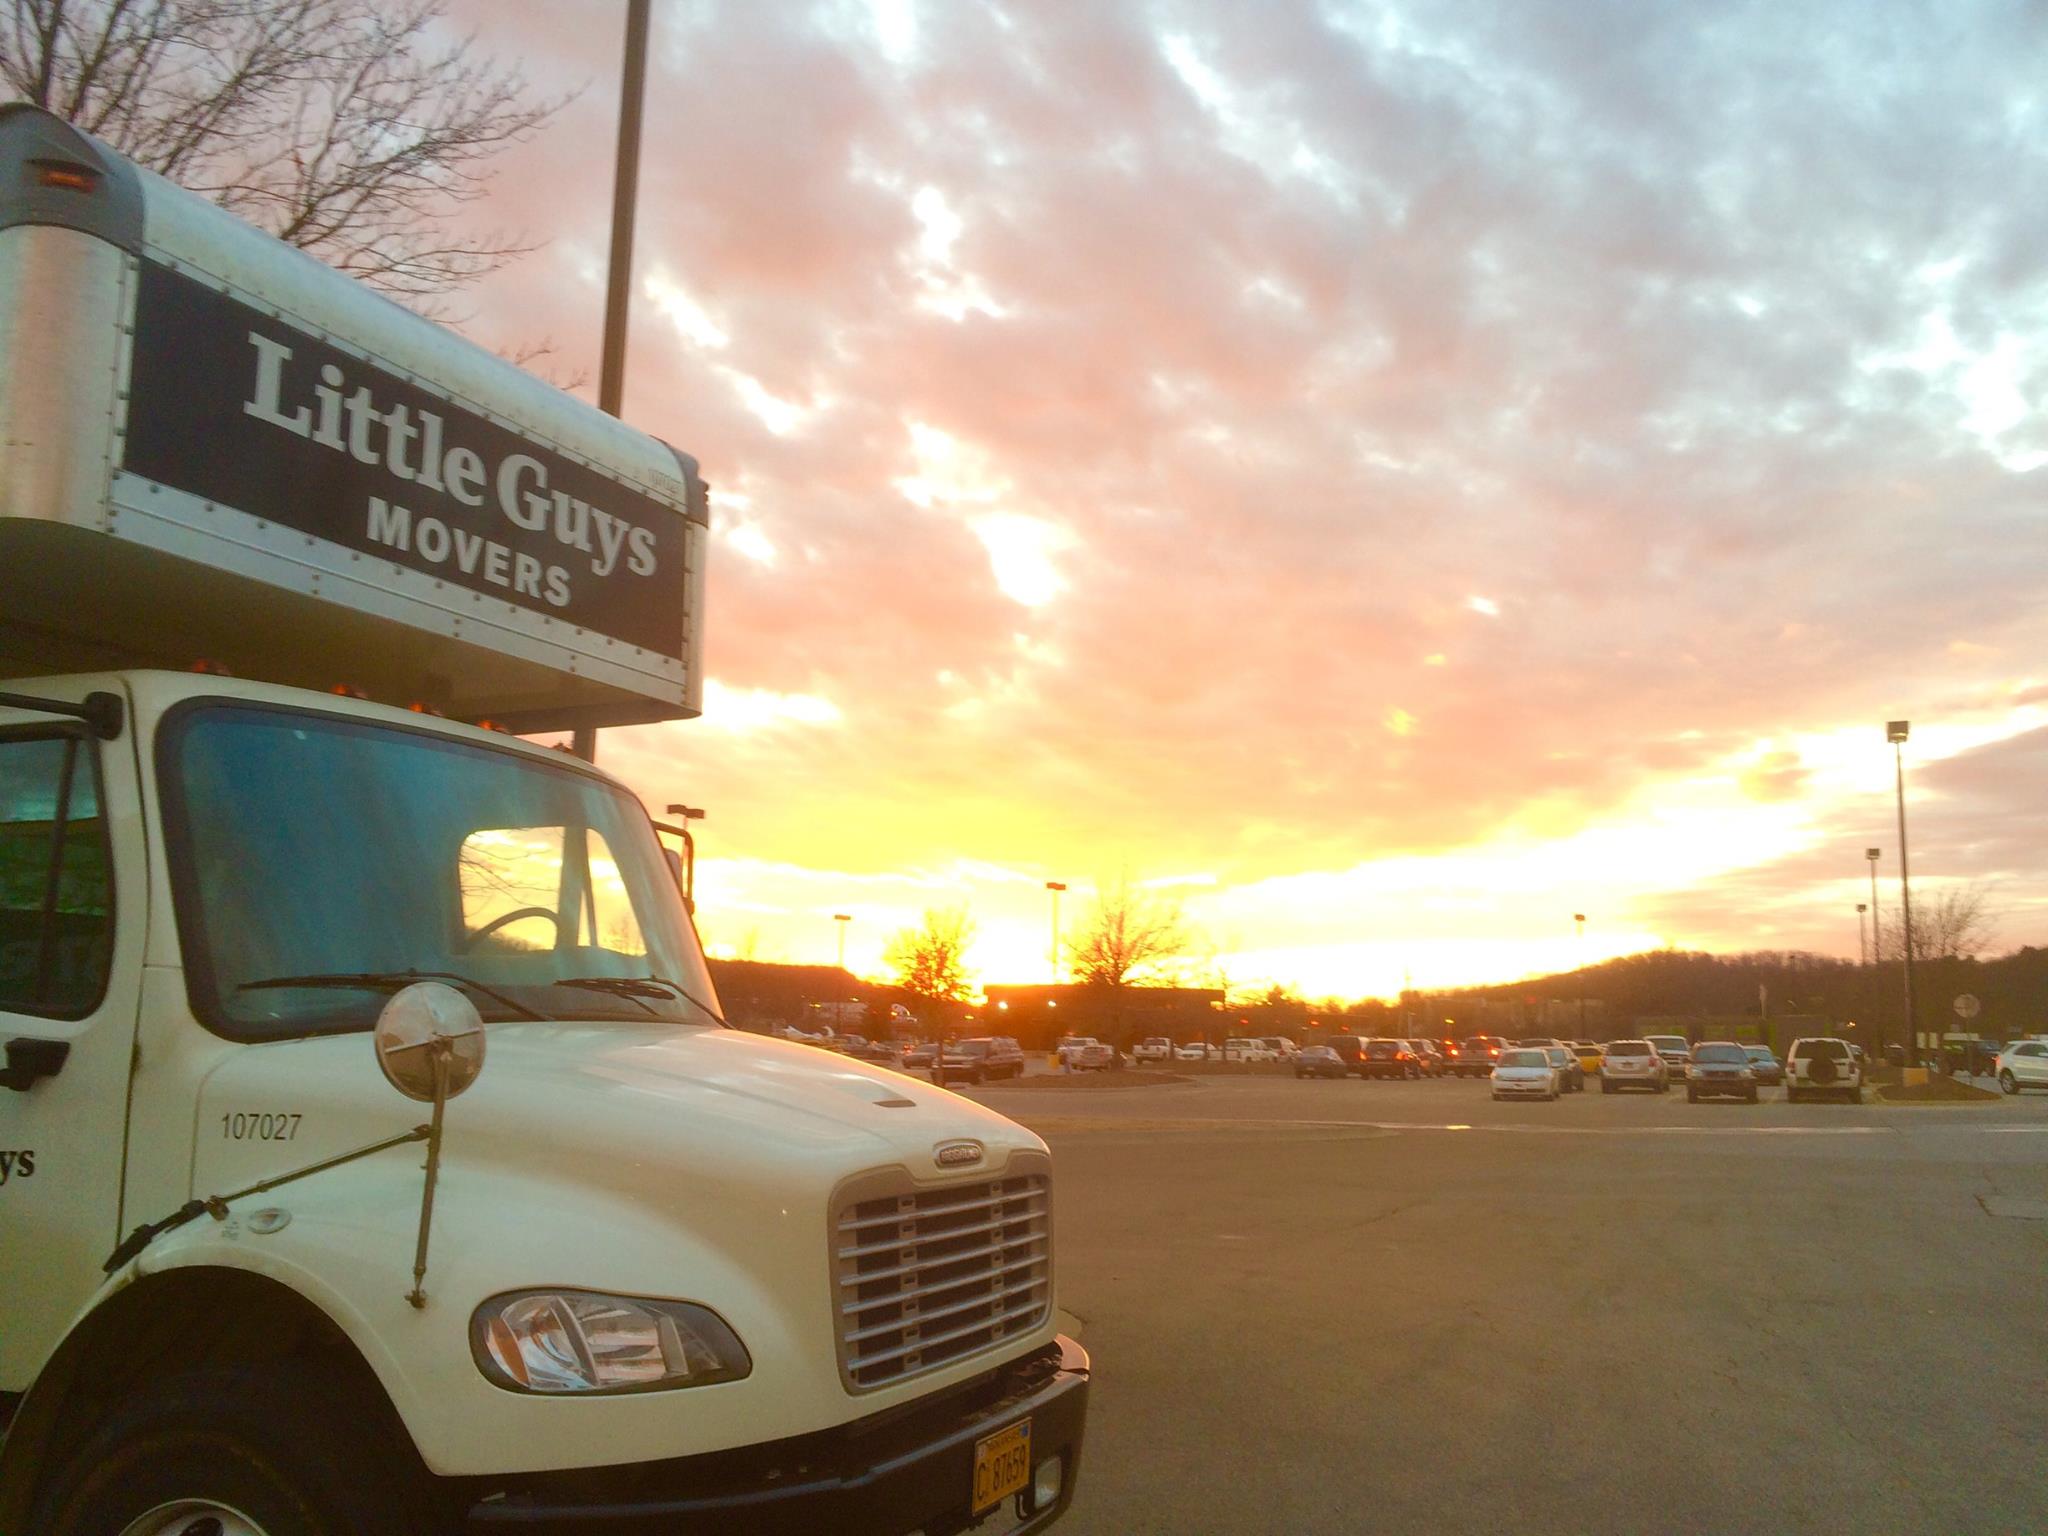 Little Guys Movers truck with sunset